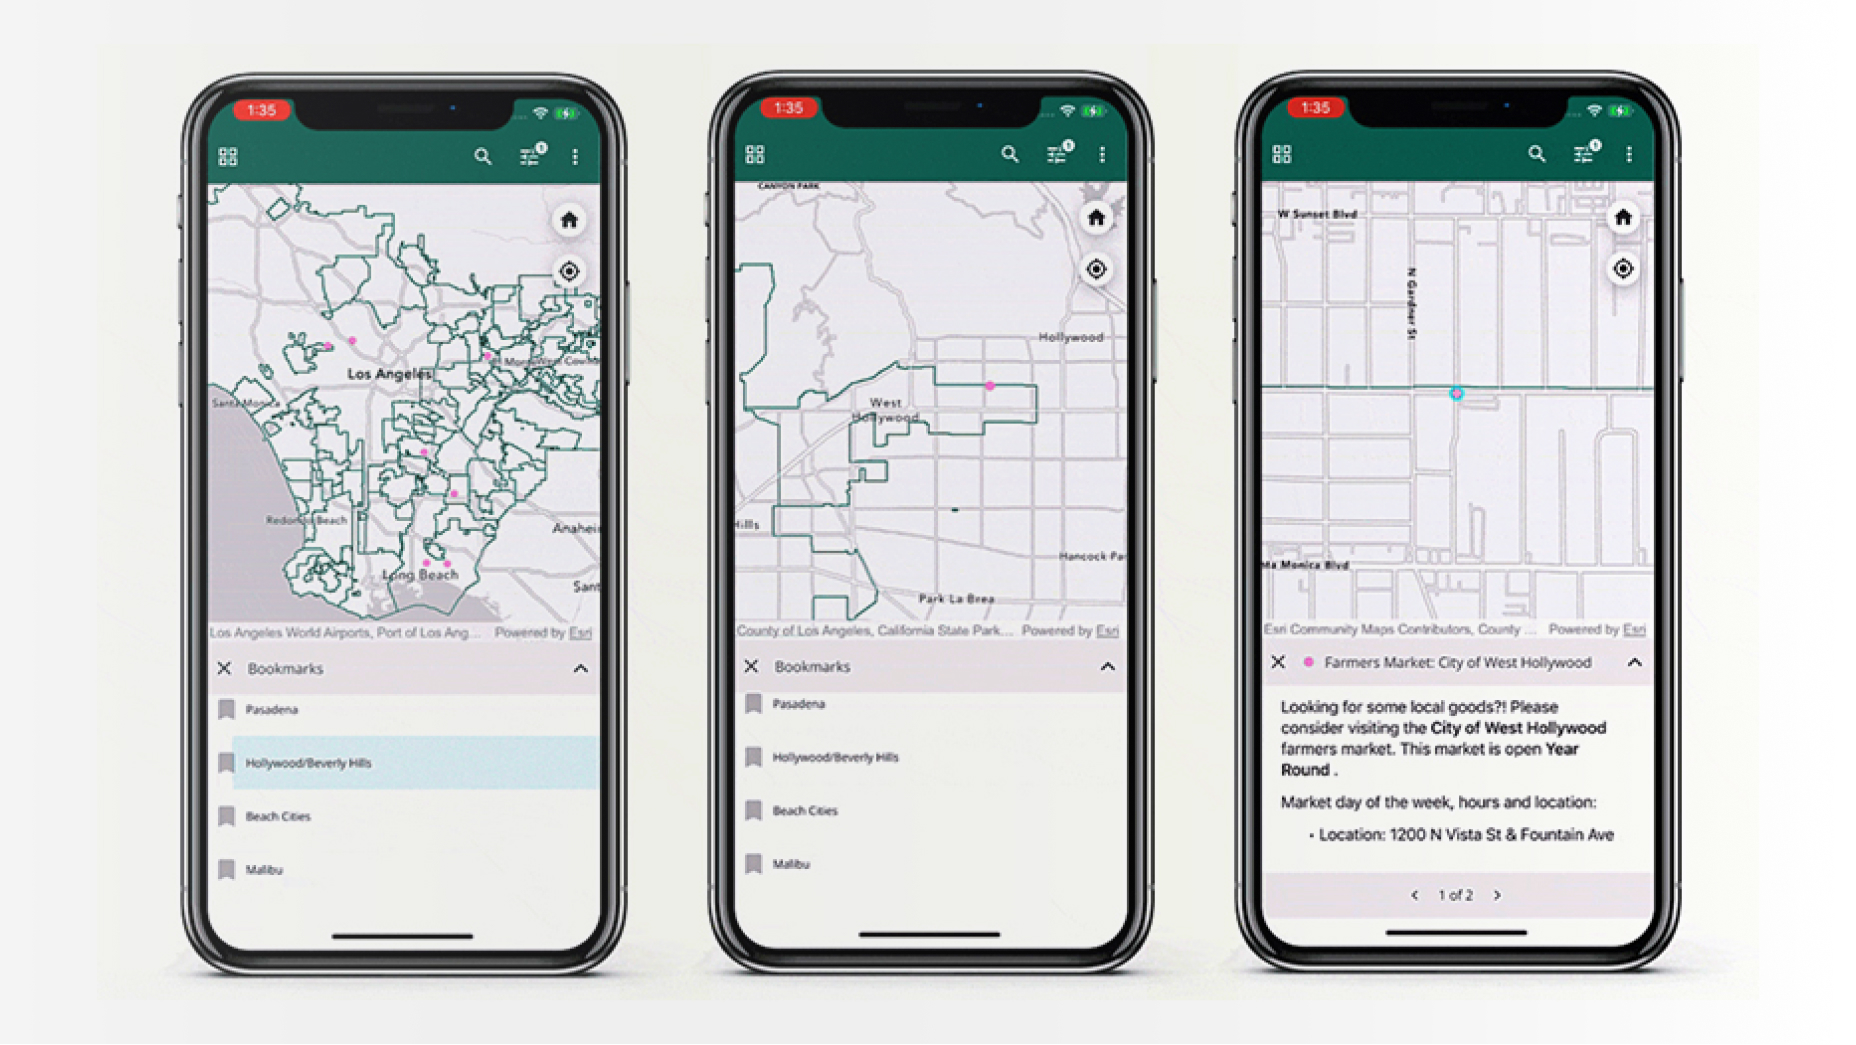 Three cell phones side-by-side displaying maps with white backgrounds and green lines indicating roads